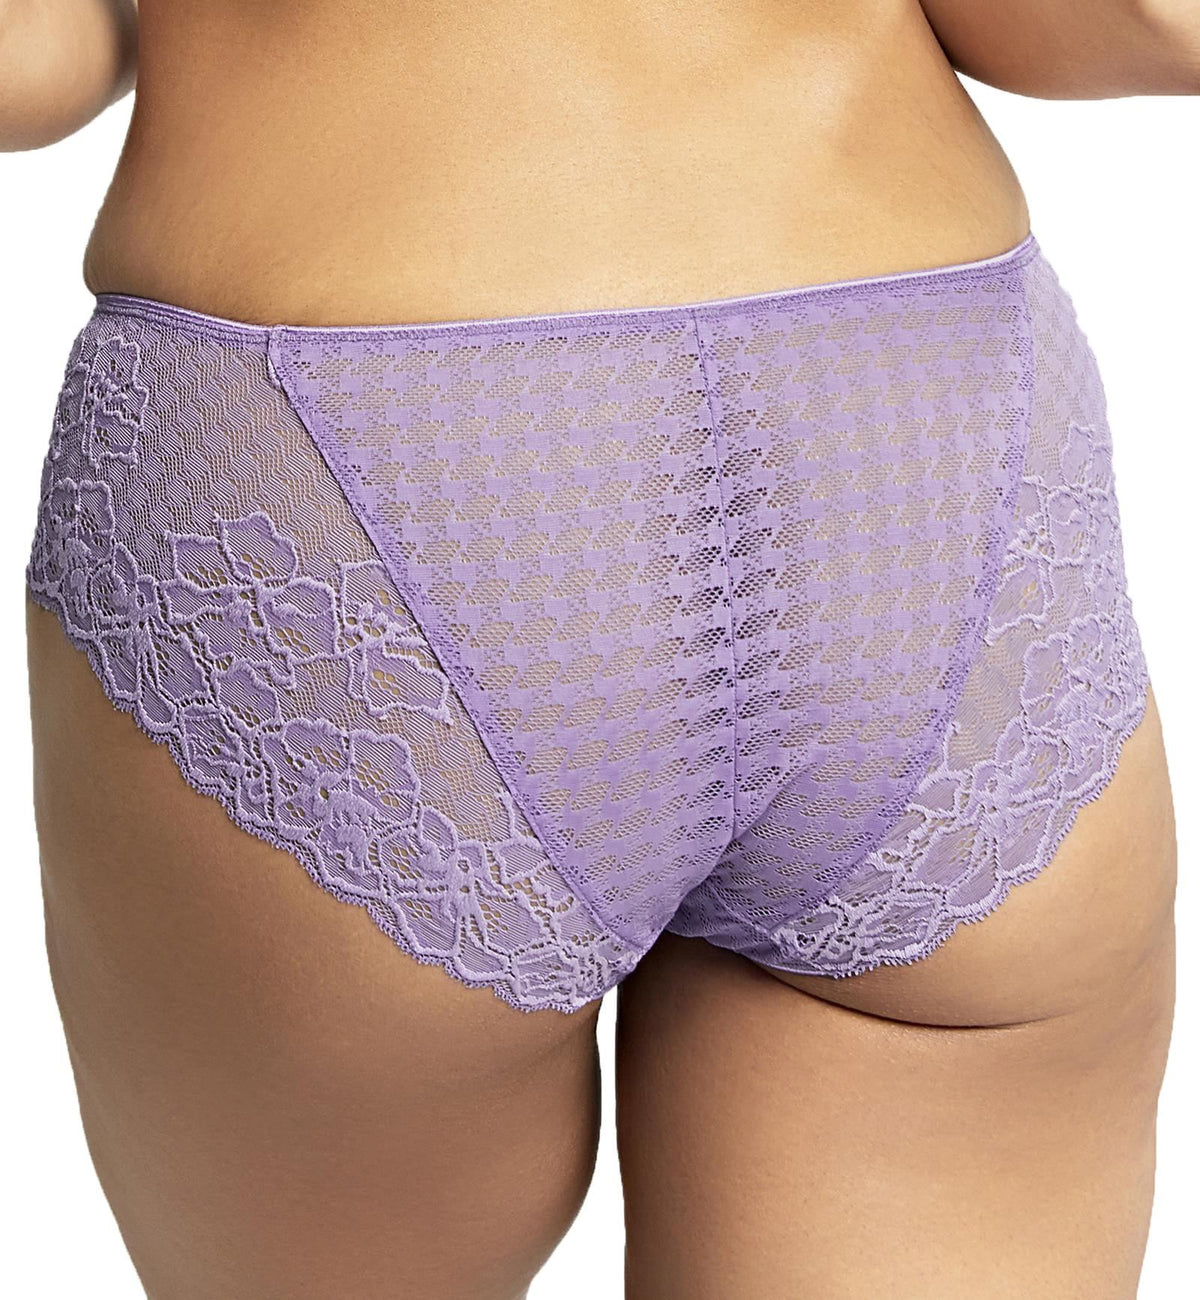 Panache Envy Matching Brief (7282),Small,Violet - Violet,Small